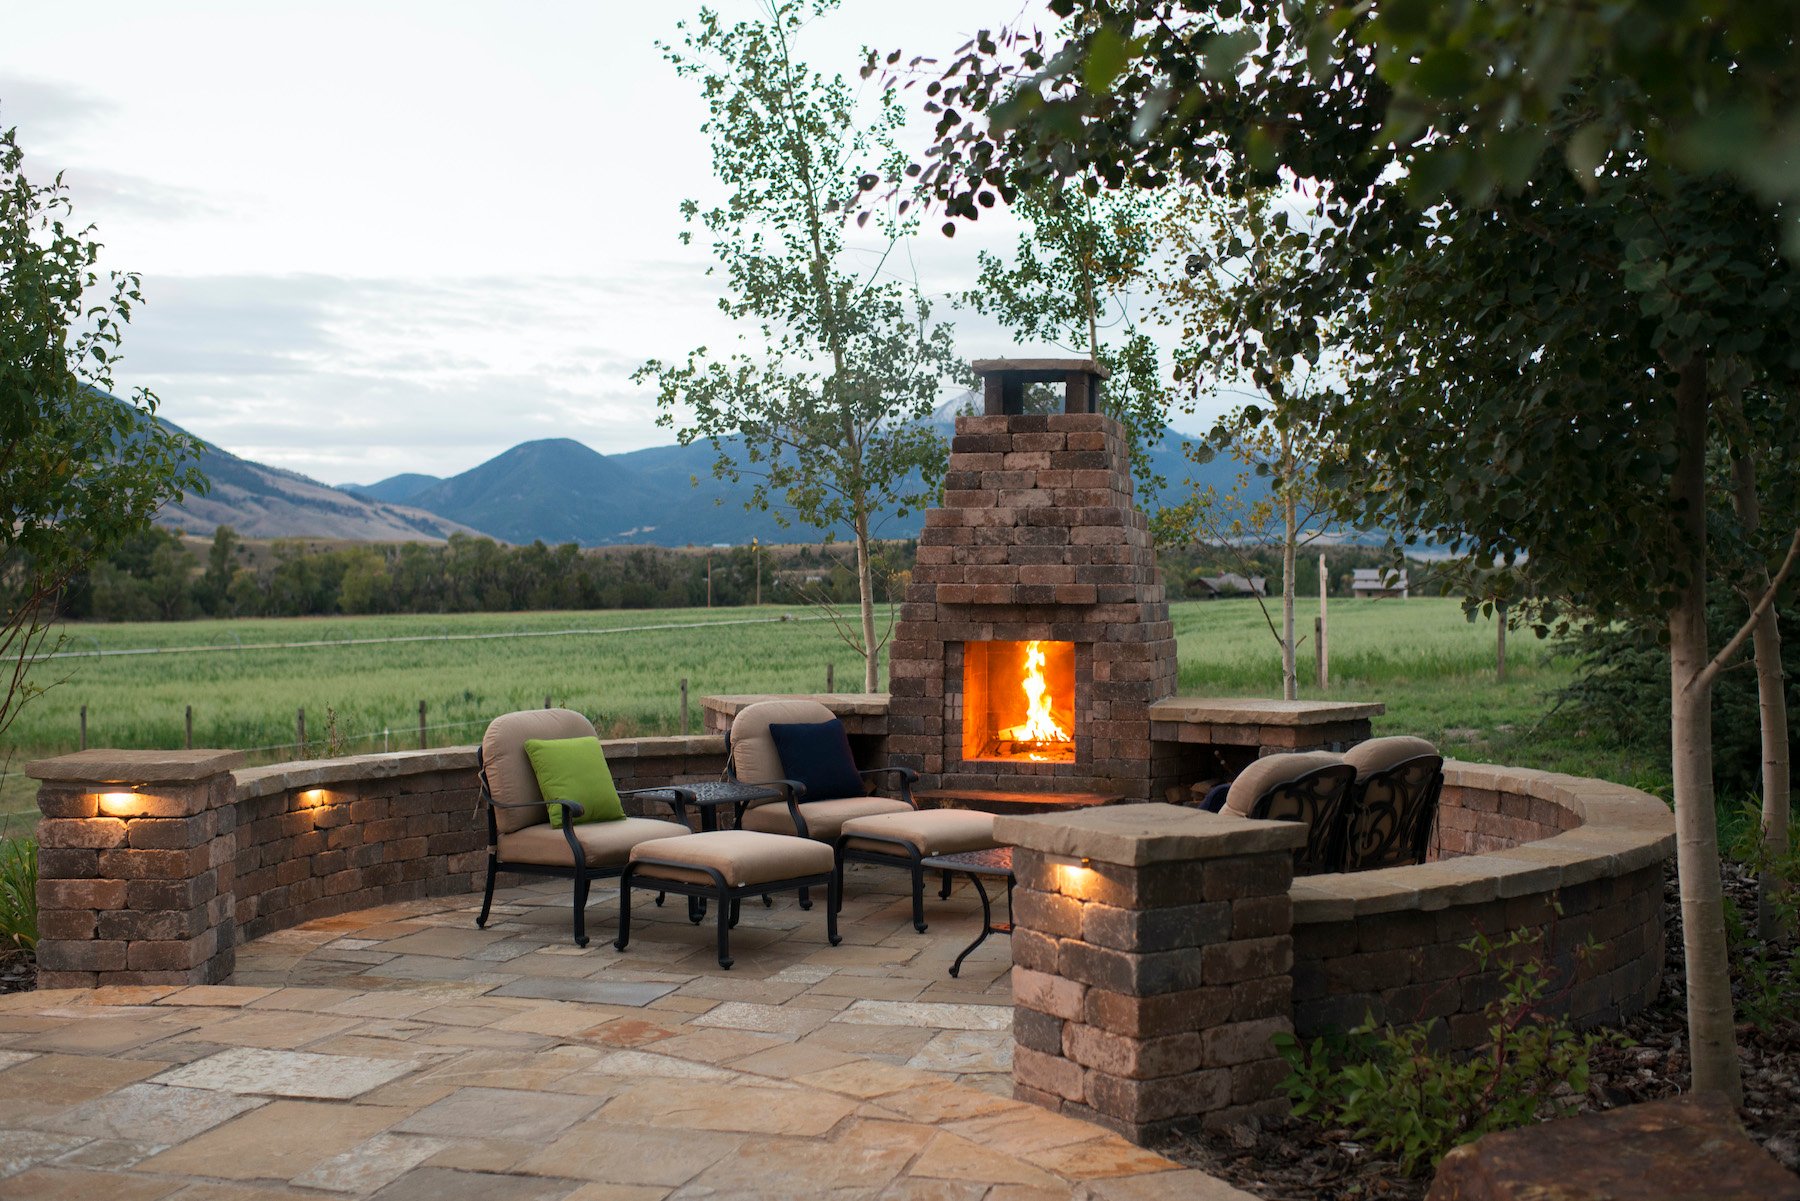 Fire place and patio